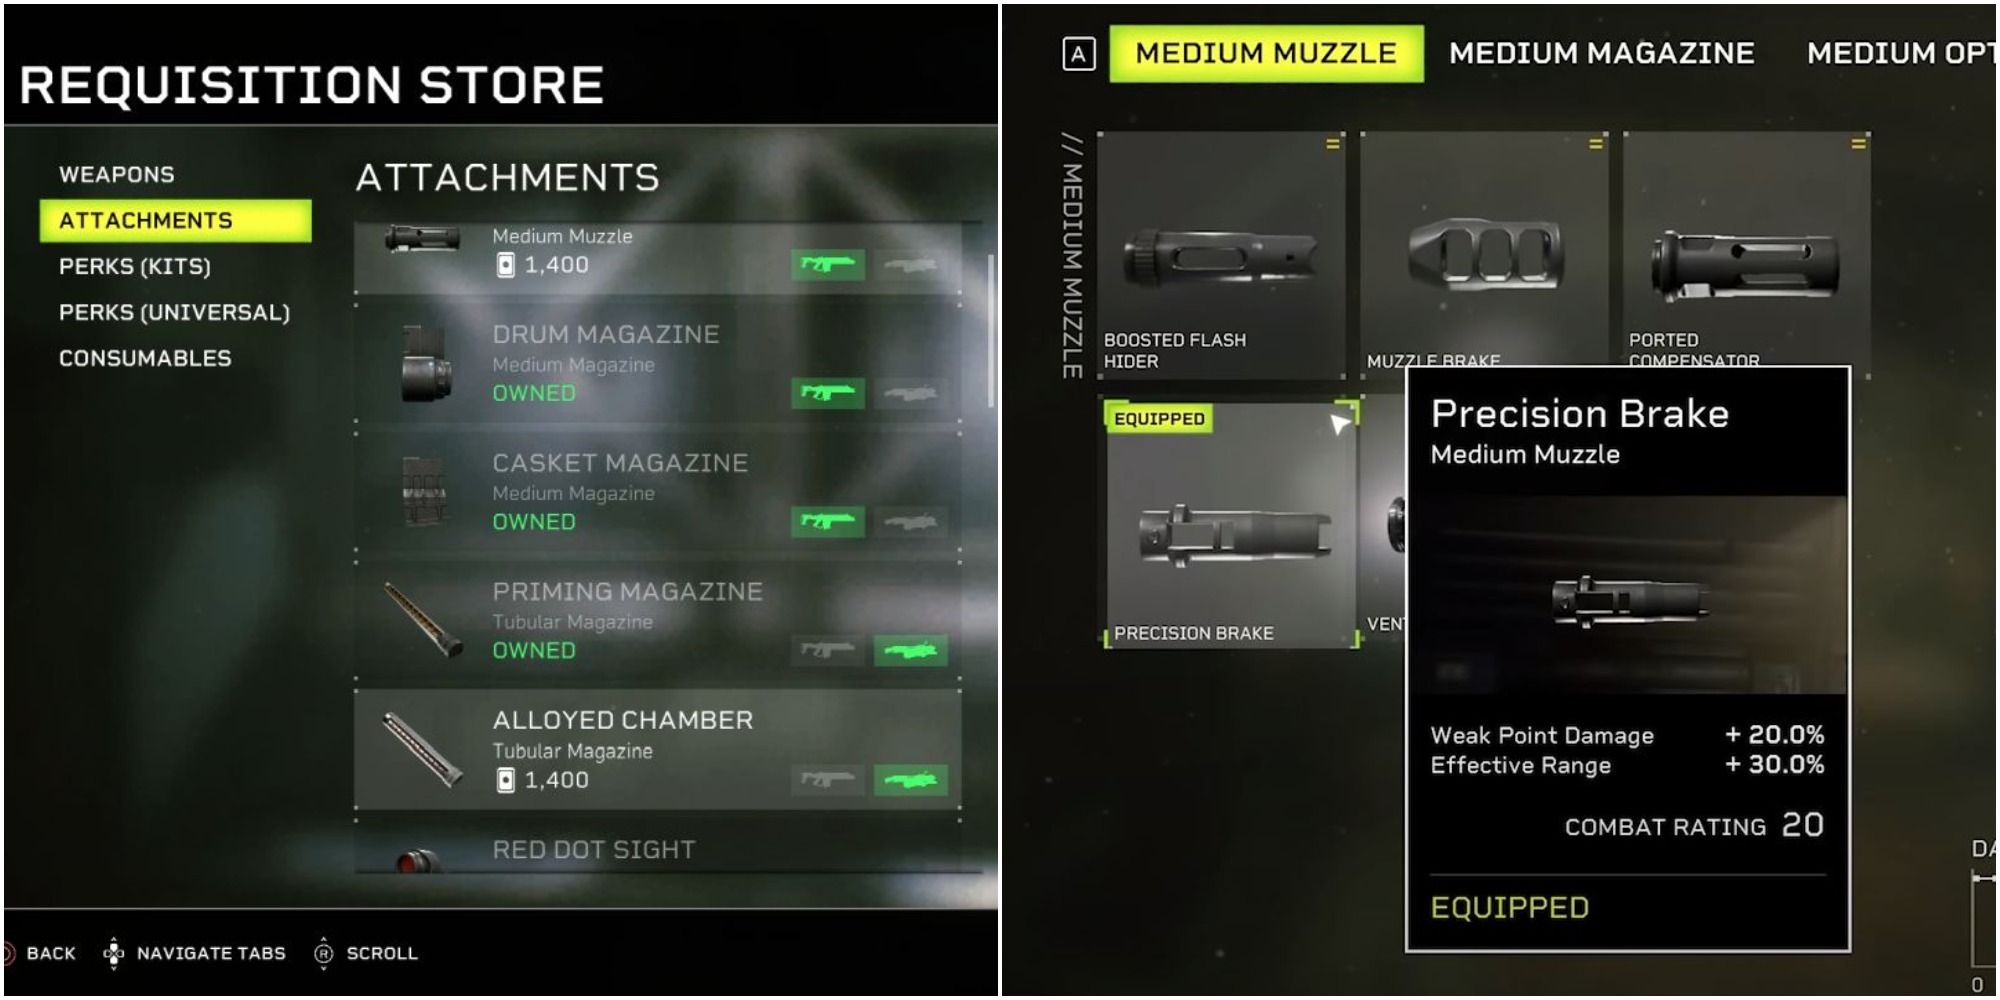 Aliens: Fireteam Elite side-by-side of the Requisition Store and gun attachments for the Pulse Rifle